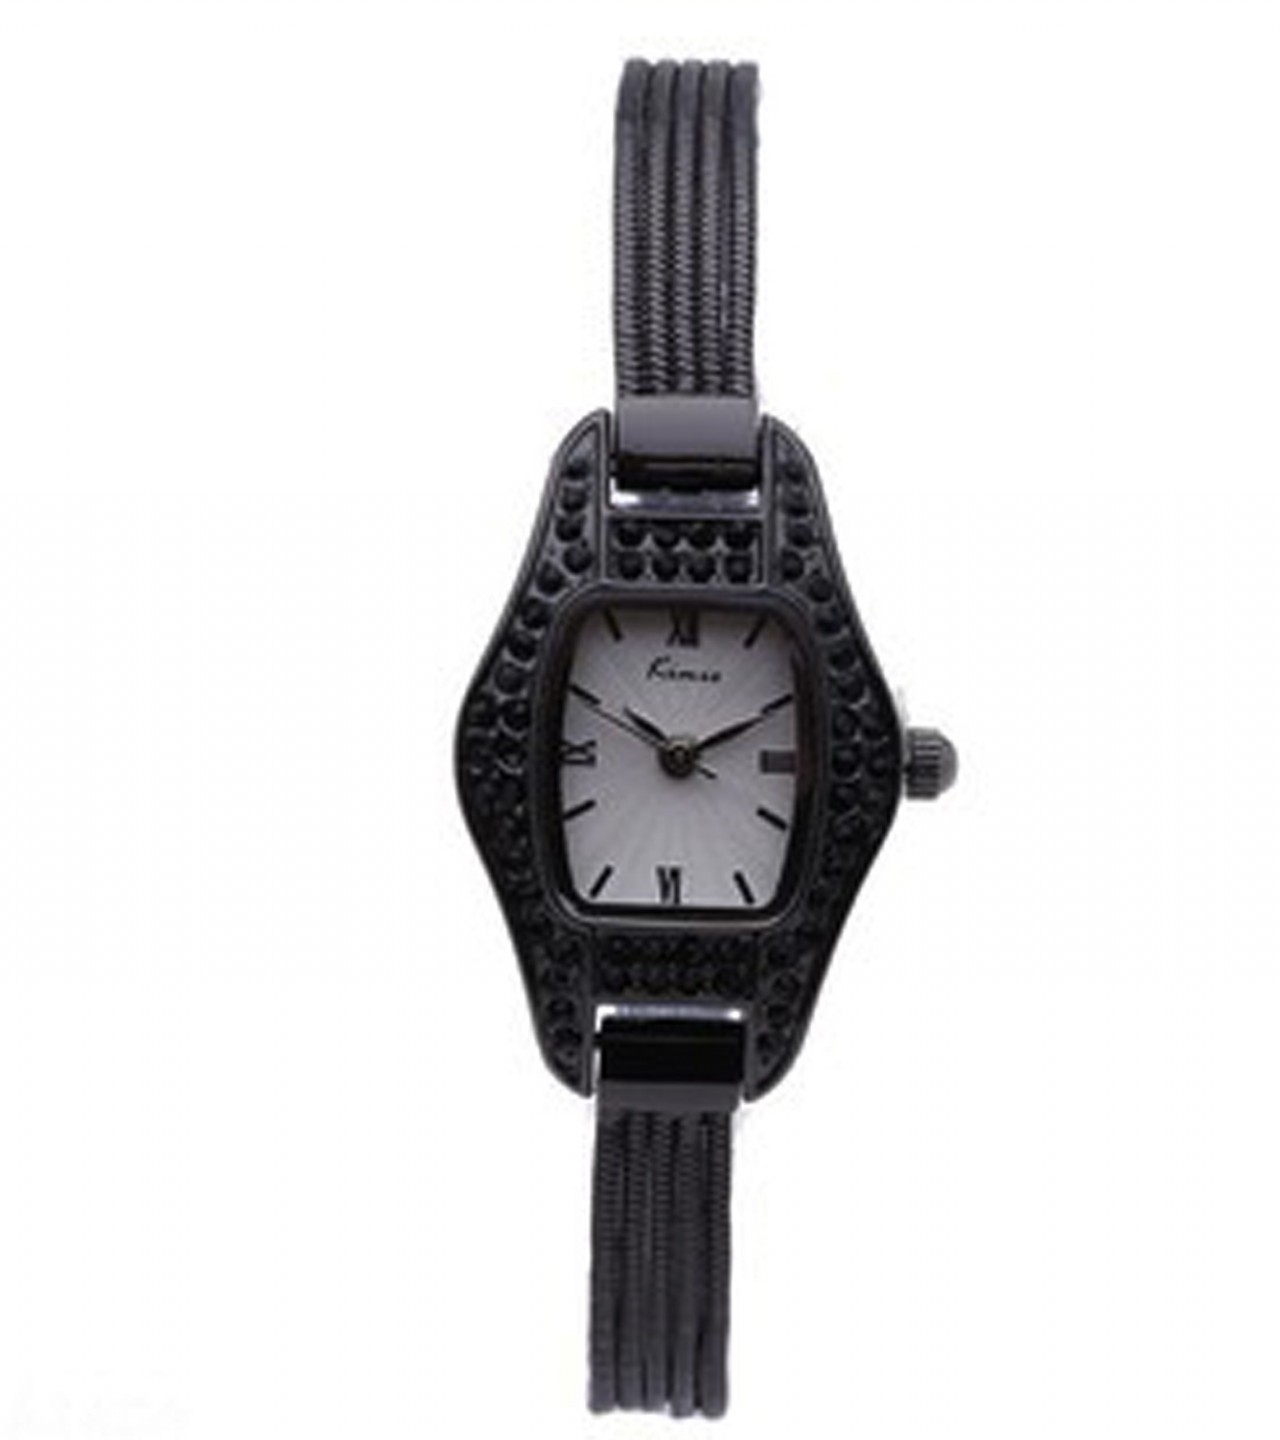 KC Kimio Stainless Steel Analog Watch For Women